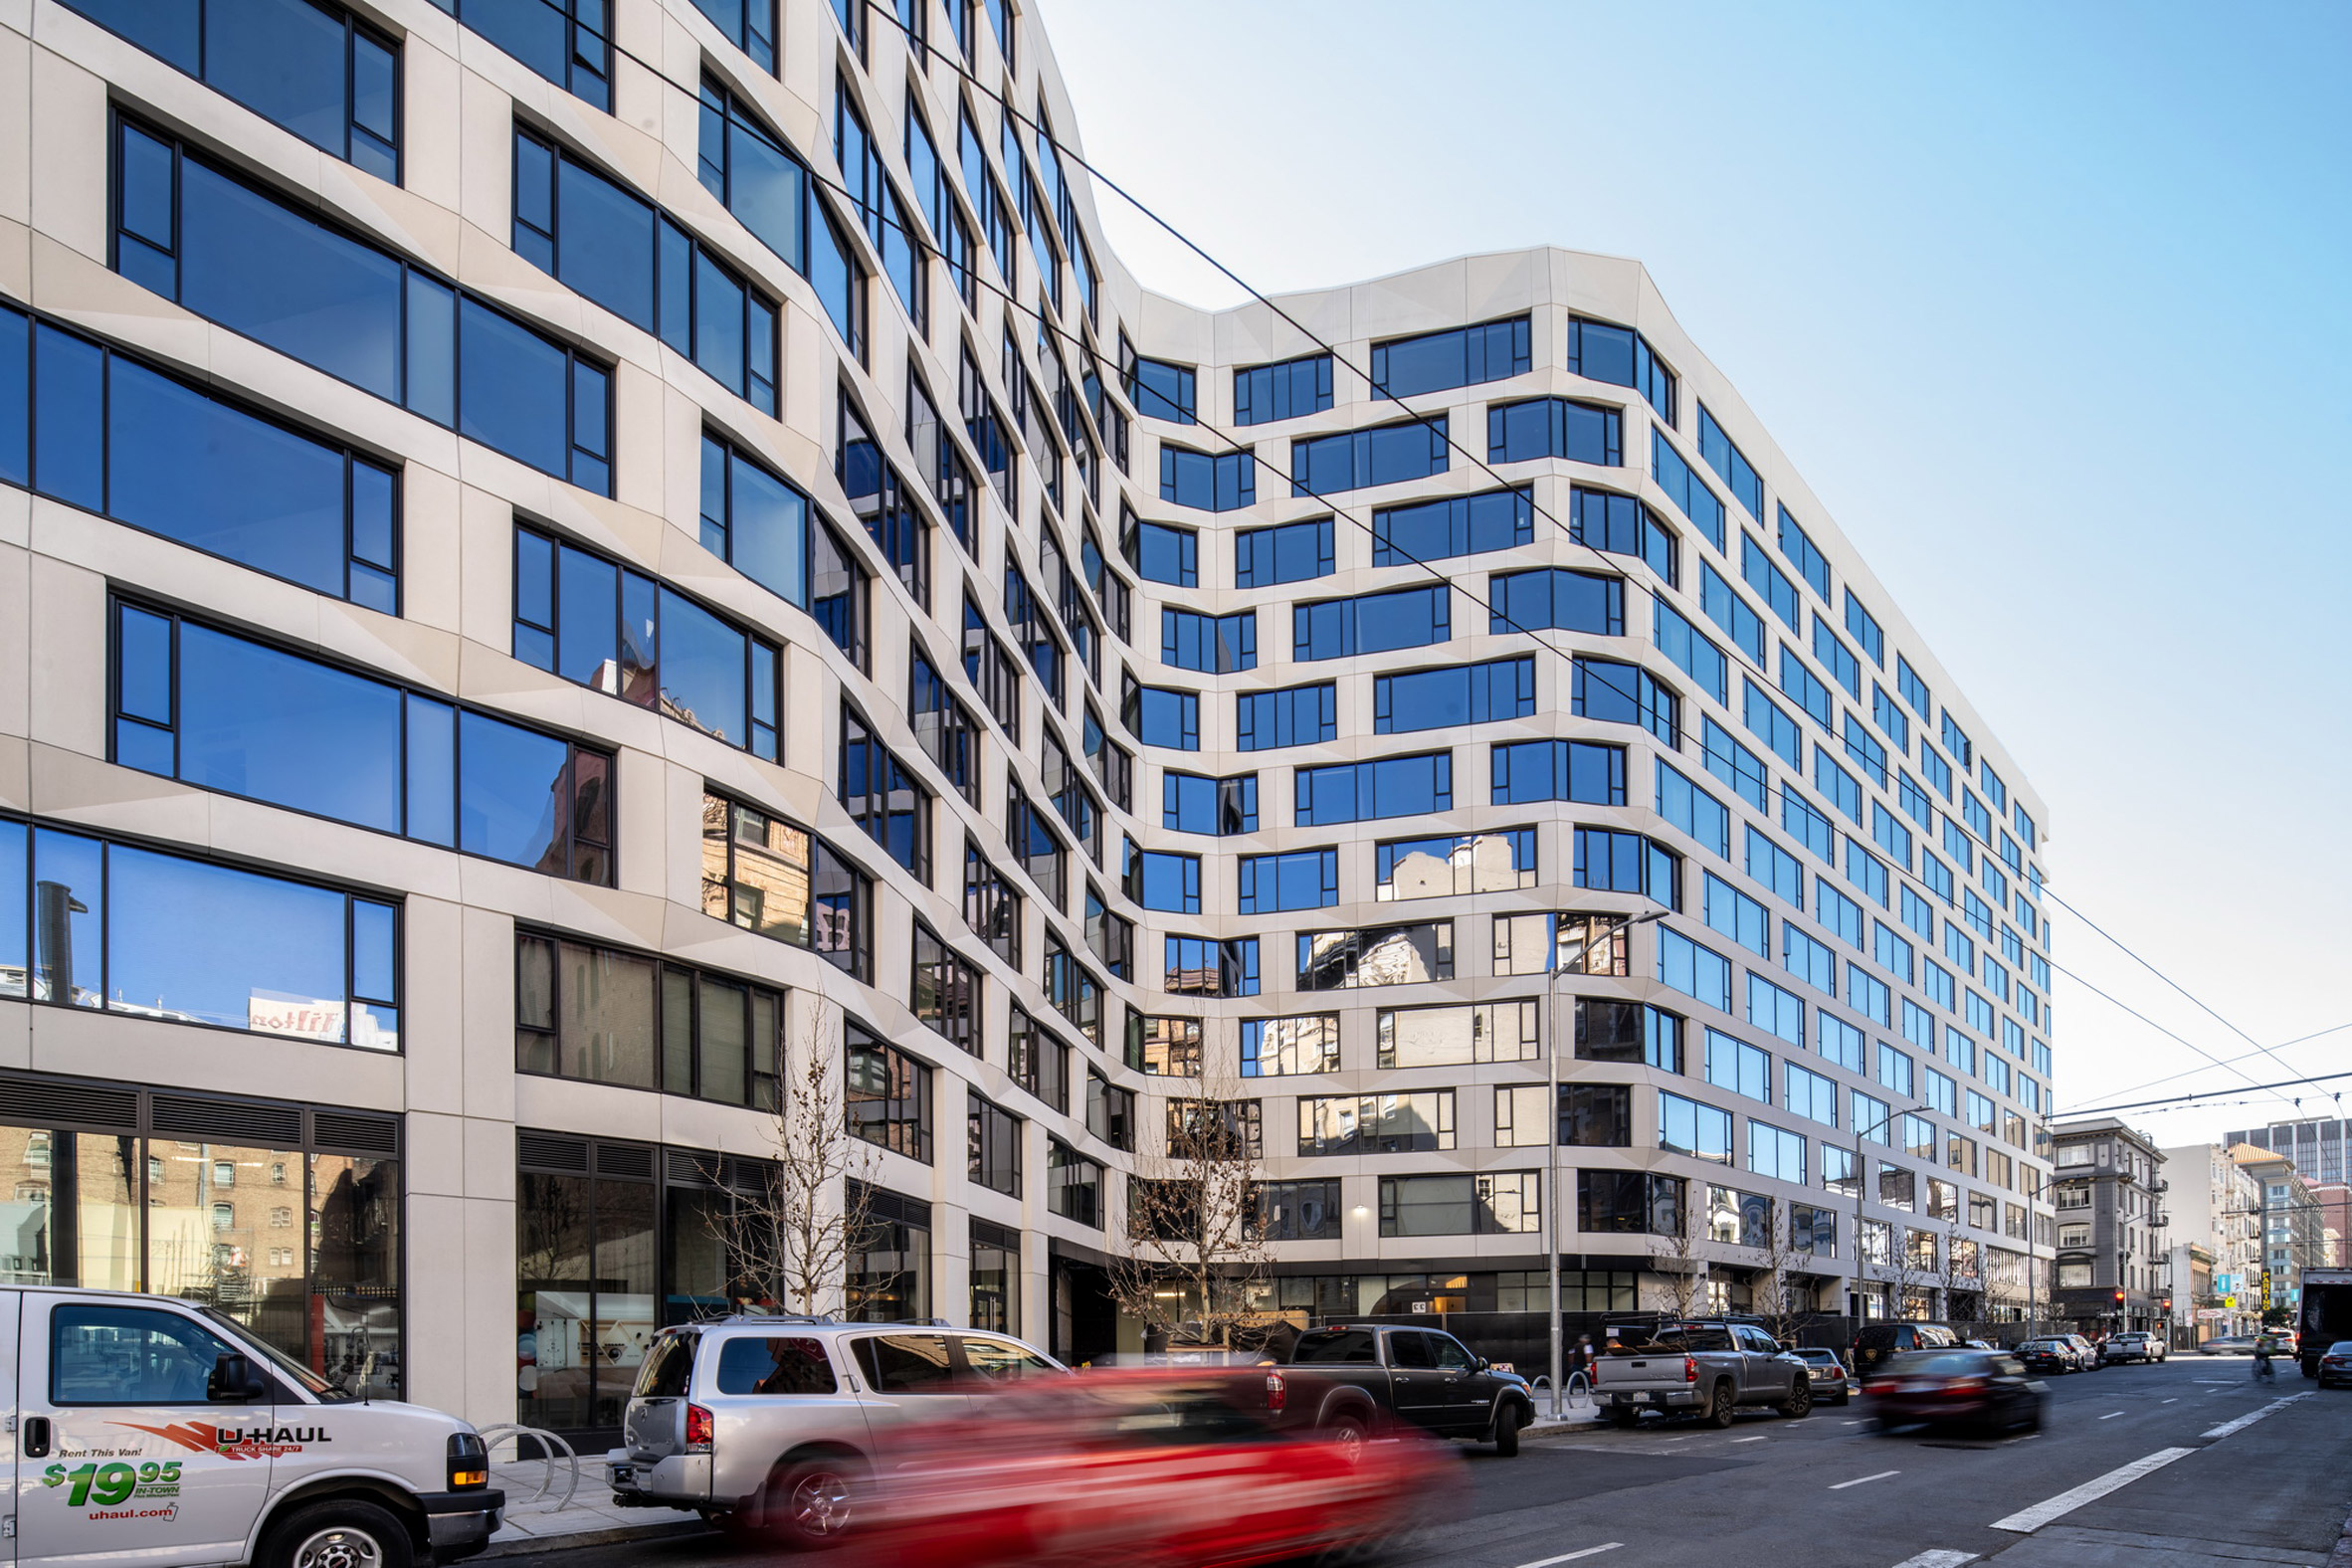 Curving mixed-use building with faceted panels on its facade by Handel Architects